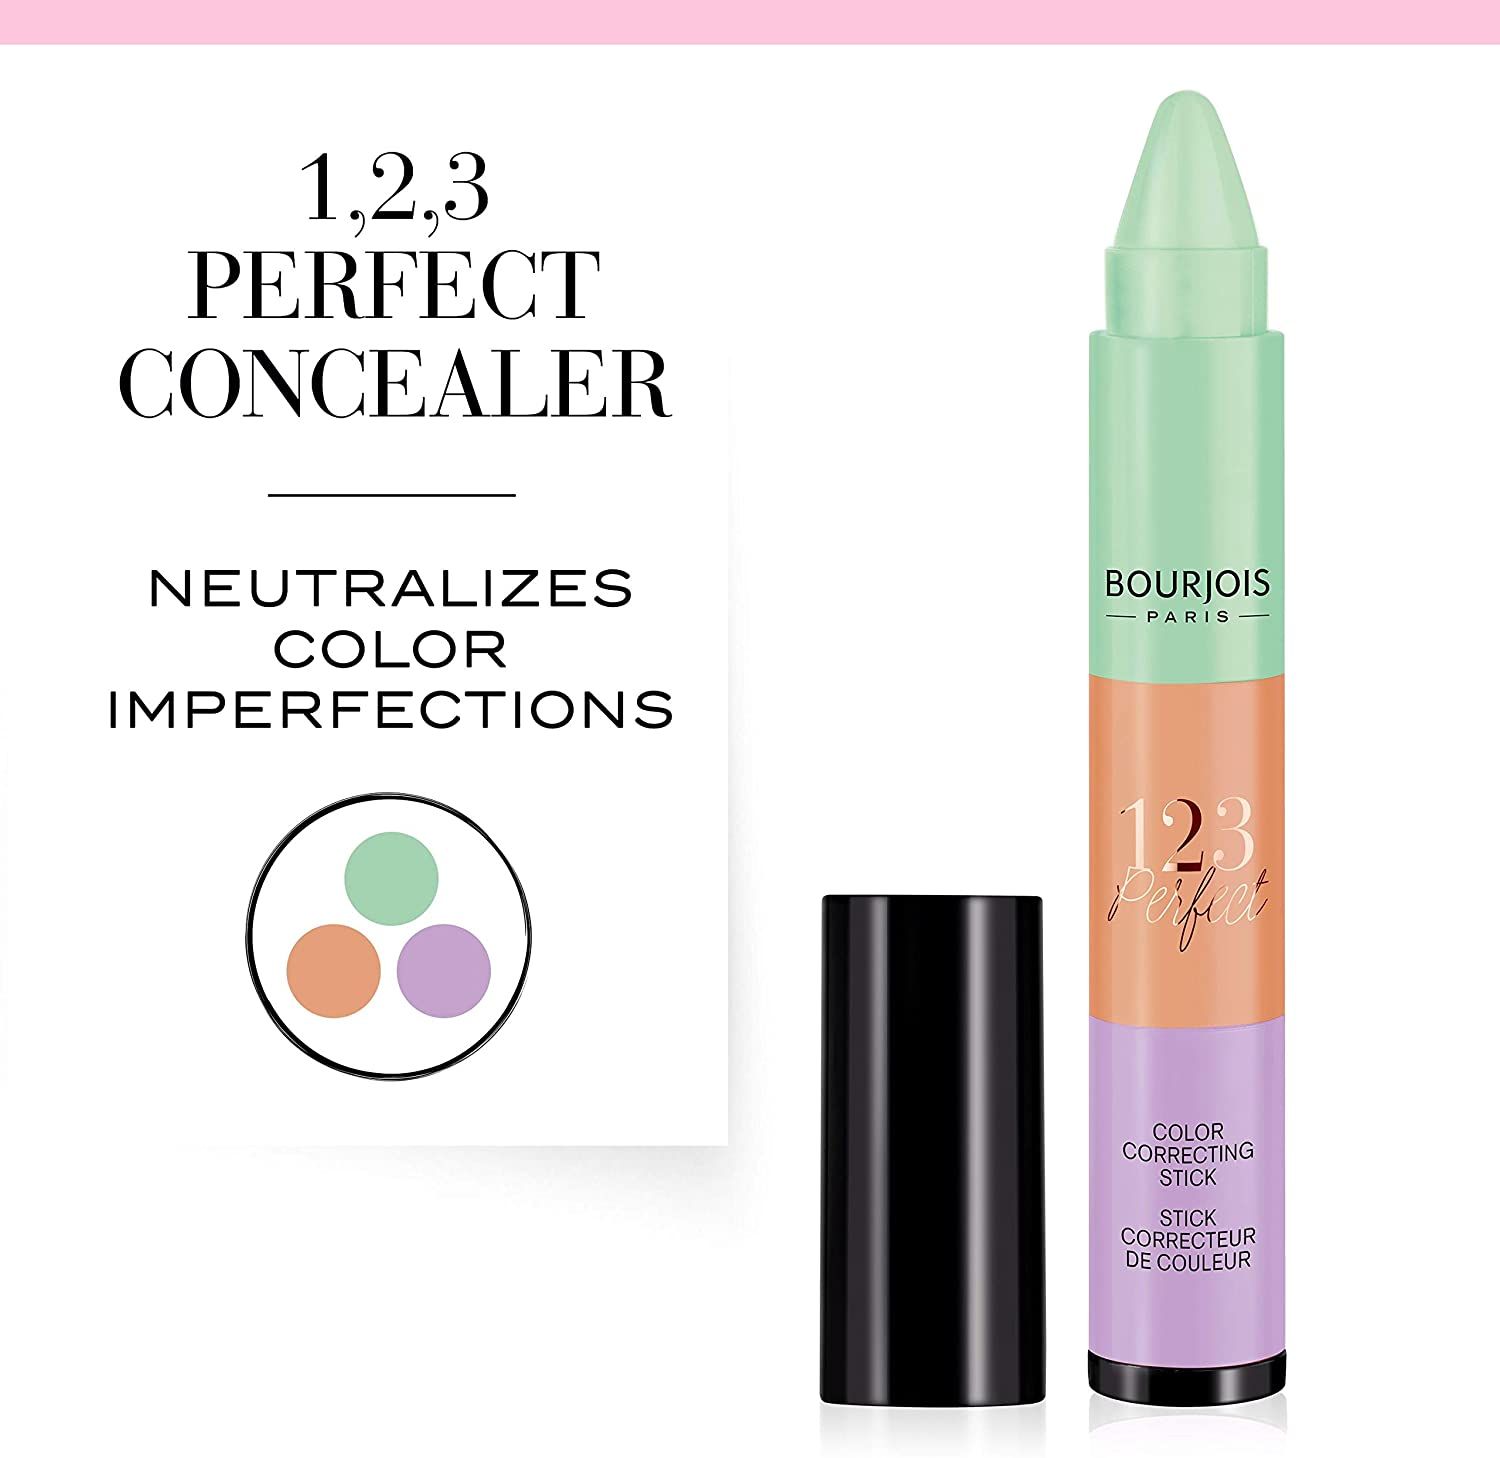 Bourjois 123 Perfect Colour Correcting Stick is your multi-tasking must-have. This stackable colour correcting stick is the perfect addition to your makeup bag - it corrects colour, conceals redness, dark circles and spots so your complexion always looks perfect. It consists of 3 different shades closed in one package: green (eliminates redness), peach (eliminates bruising) and purple (eliminates discoloration). It has a pleasant, creamy formula that nicely applies to the skin and blends. In addition, it makes the skin soft and smooth.